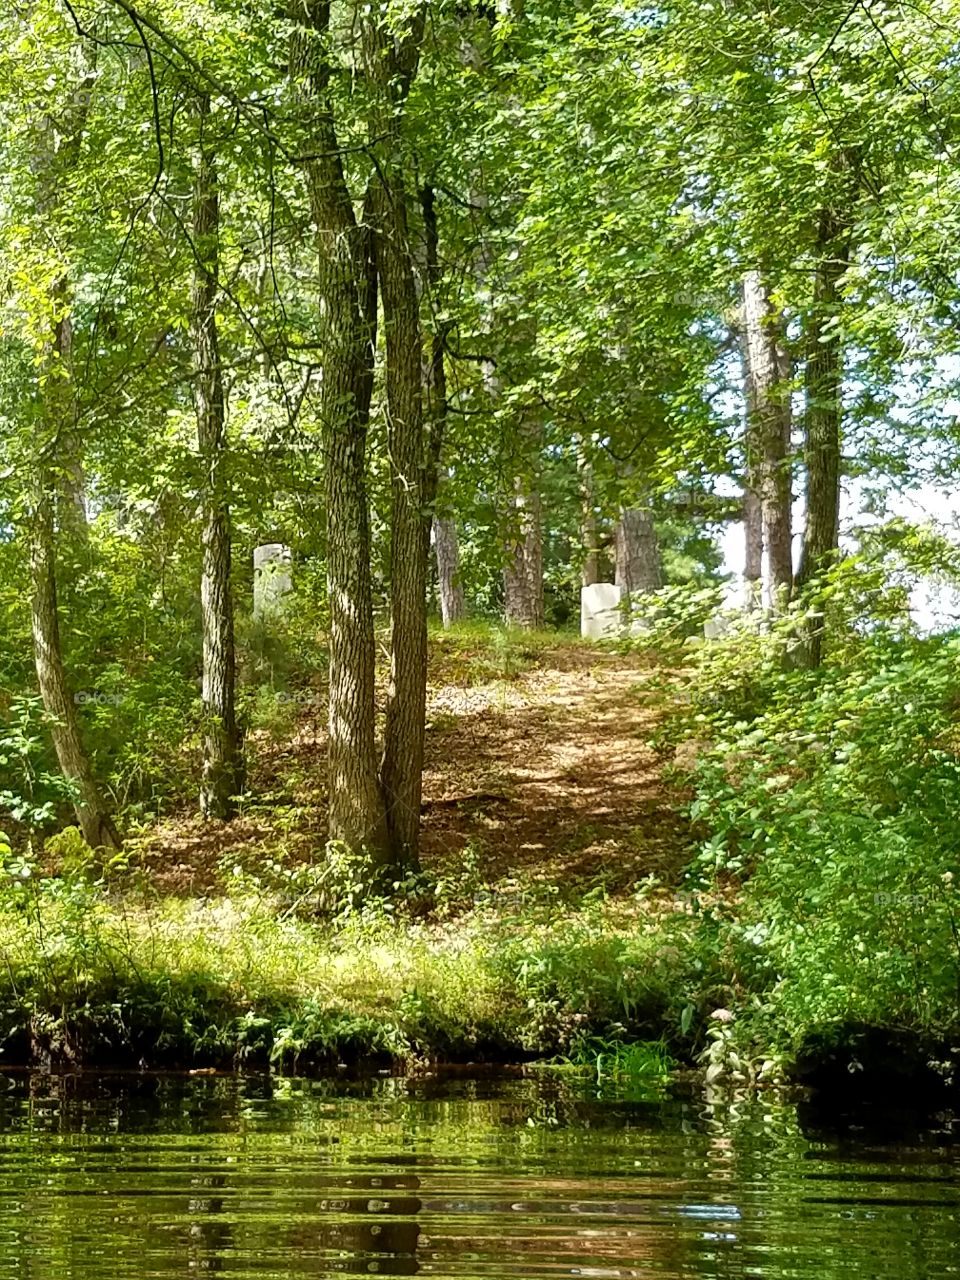 Cemetery in the wood along the creek